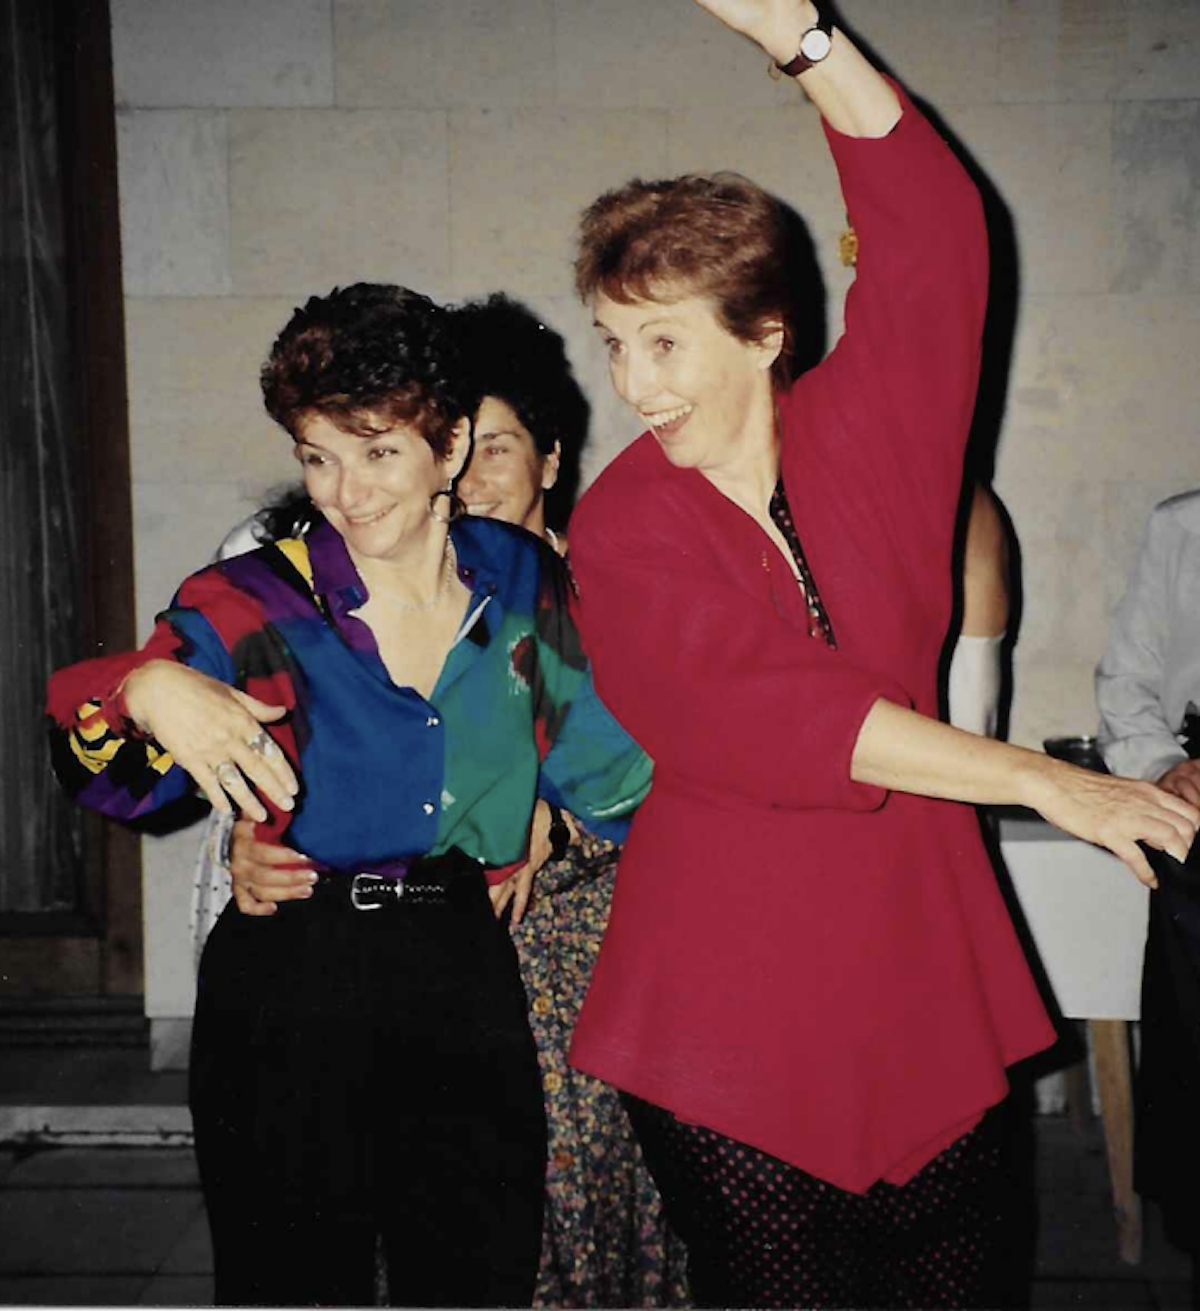 Sylvia Spring, filmmaker and co-founder of MediaWatch dancing with then Executive Director, Meg Hogarth at a women&#039;s event in Bulgaria 1994. Meg died last month in Toronto at 84.